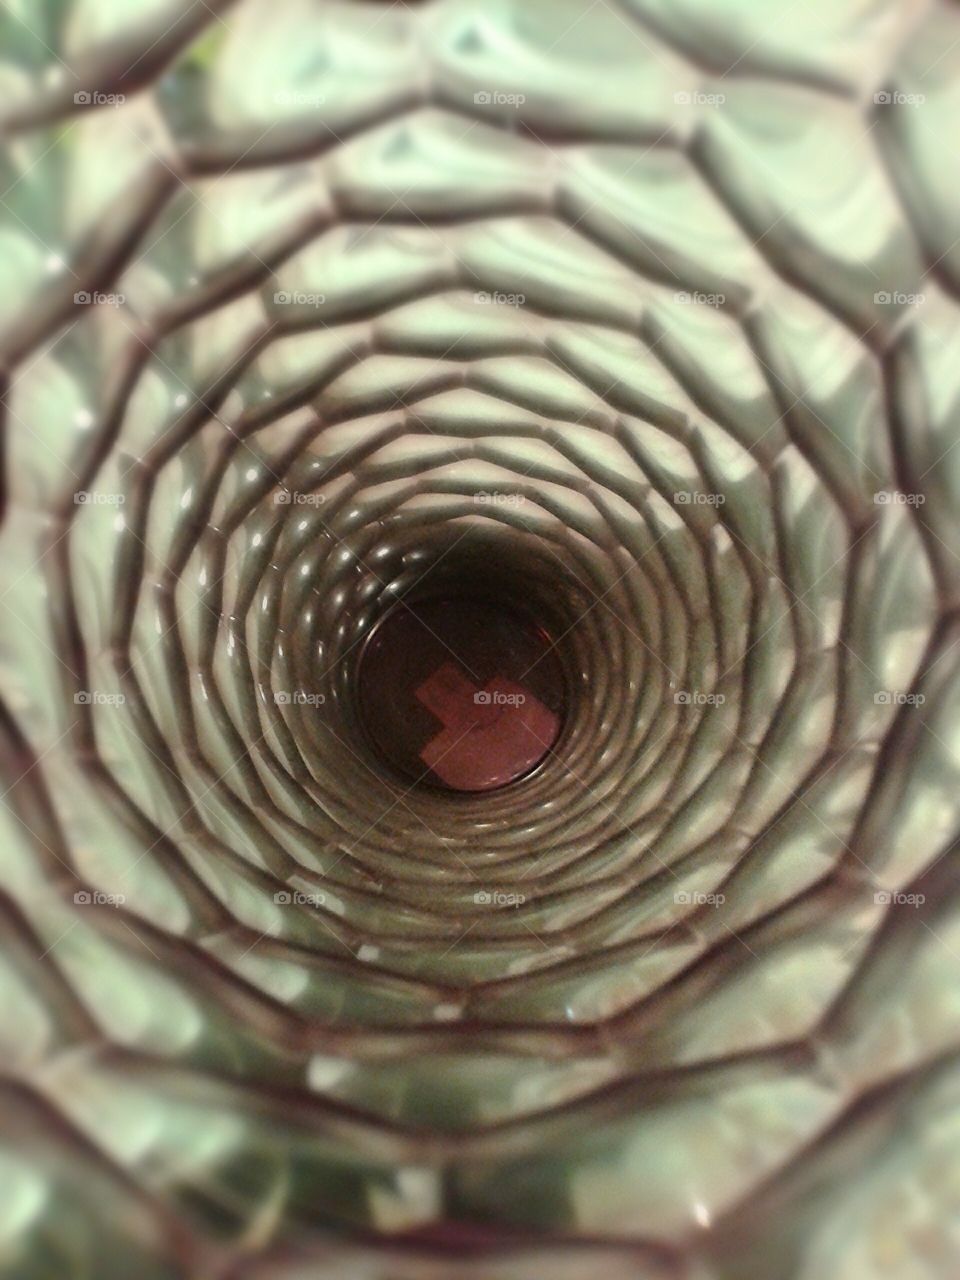 Inside the vase.. Just looking in from above.